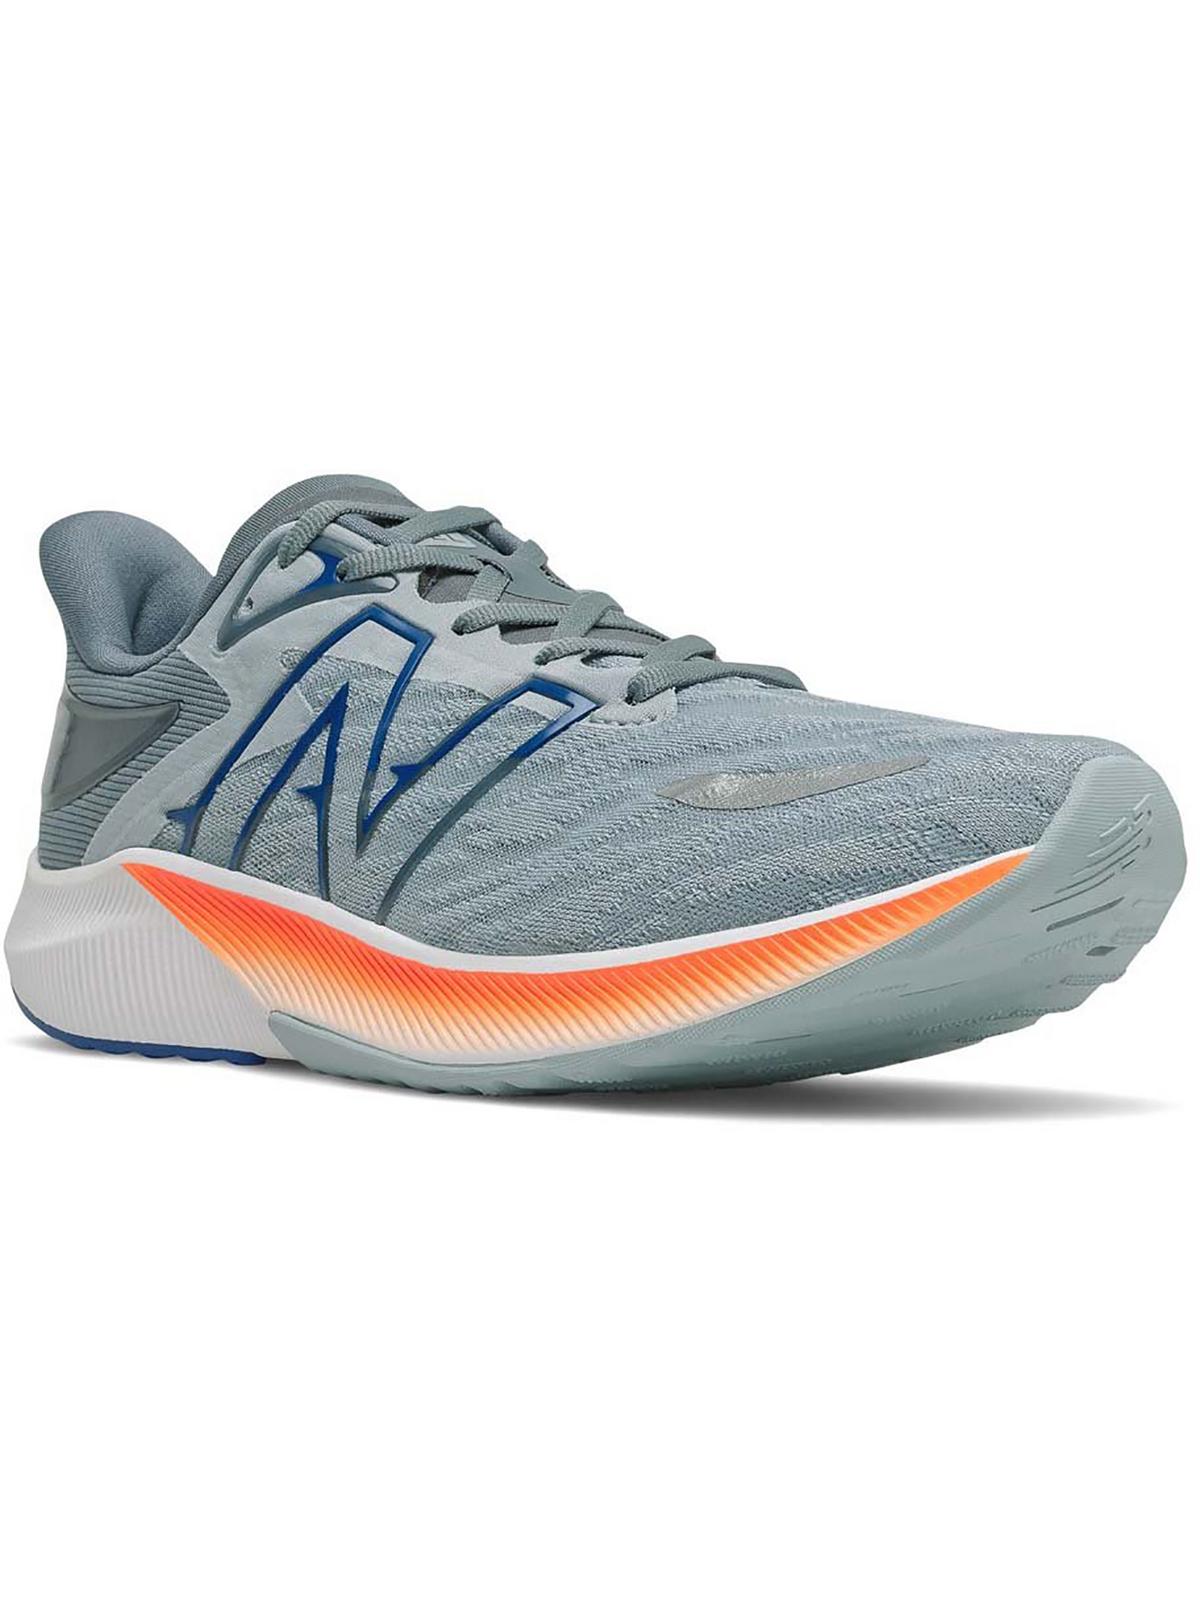 New Balance Mens Running Shoes Performance Running & Training Shoes In Grey